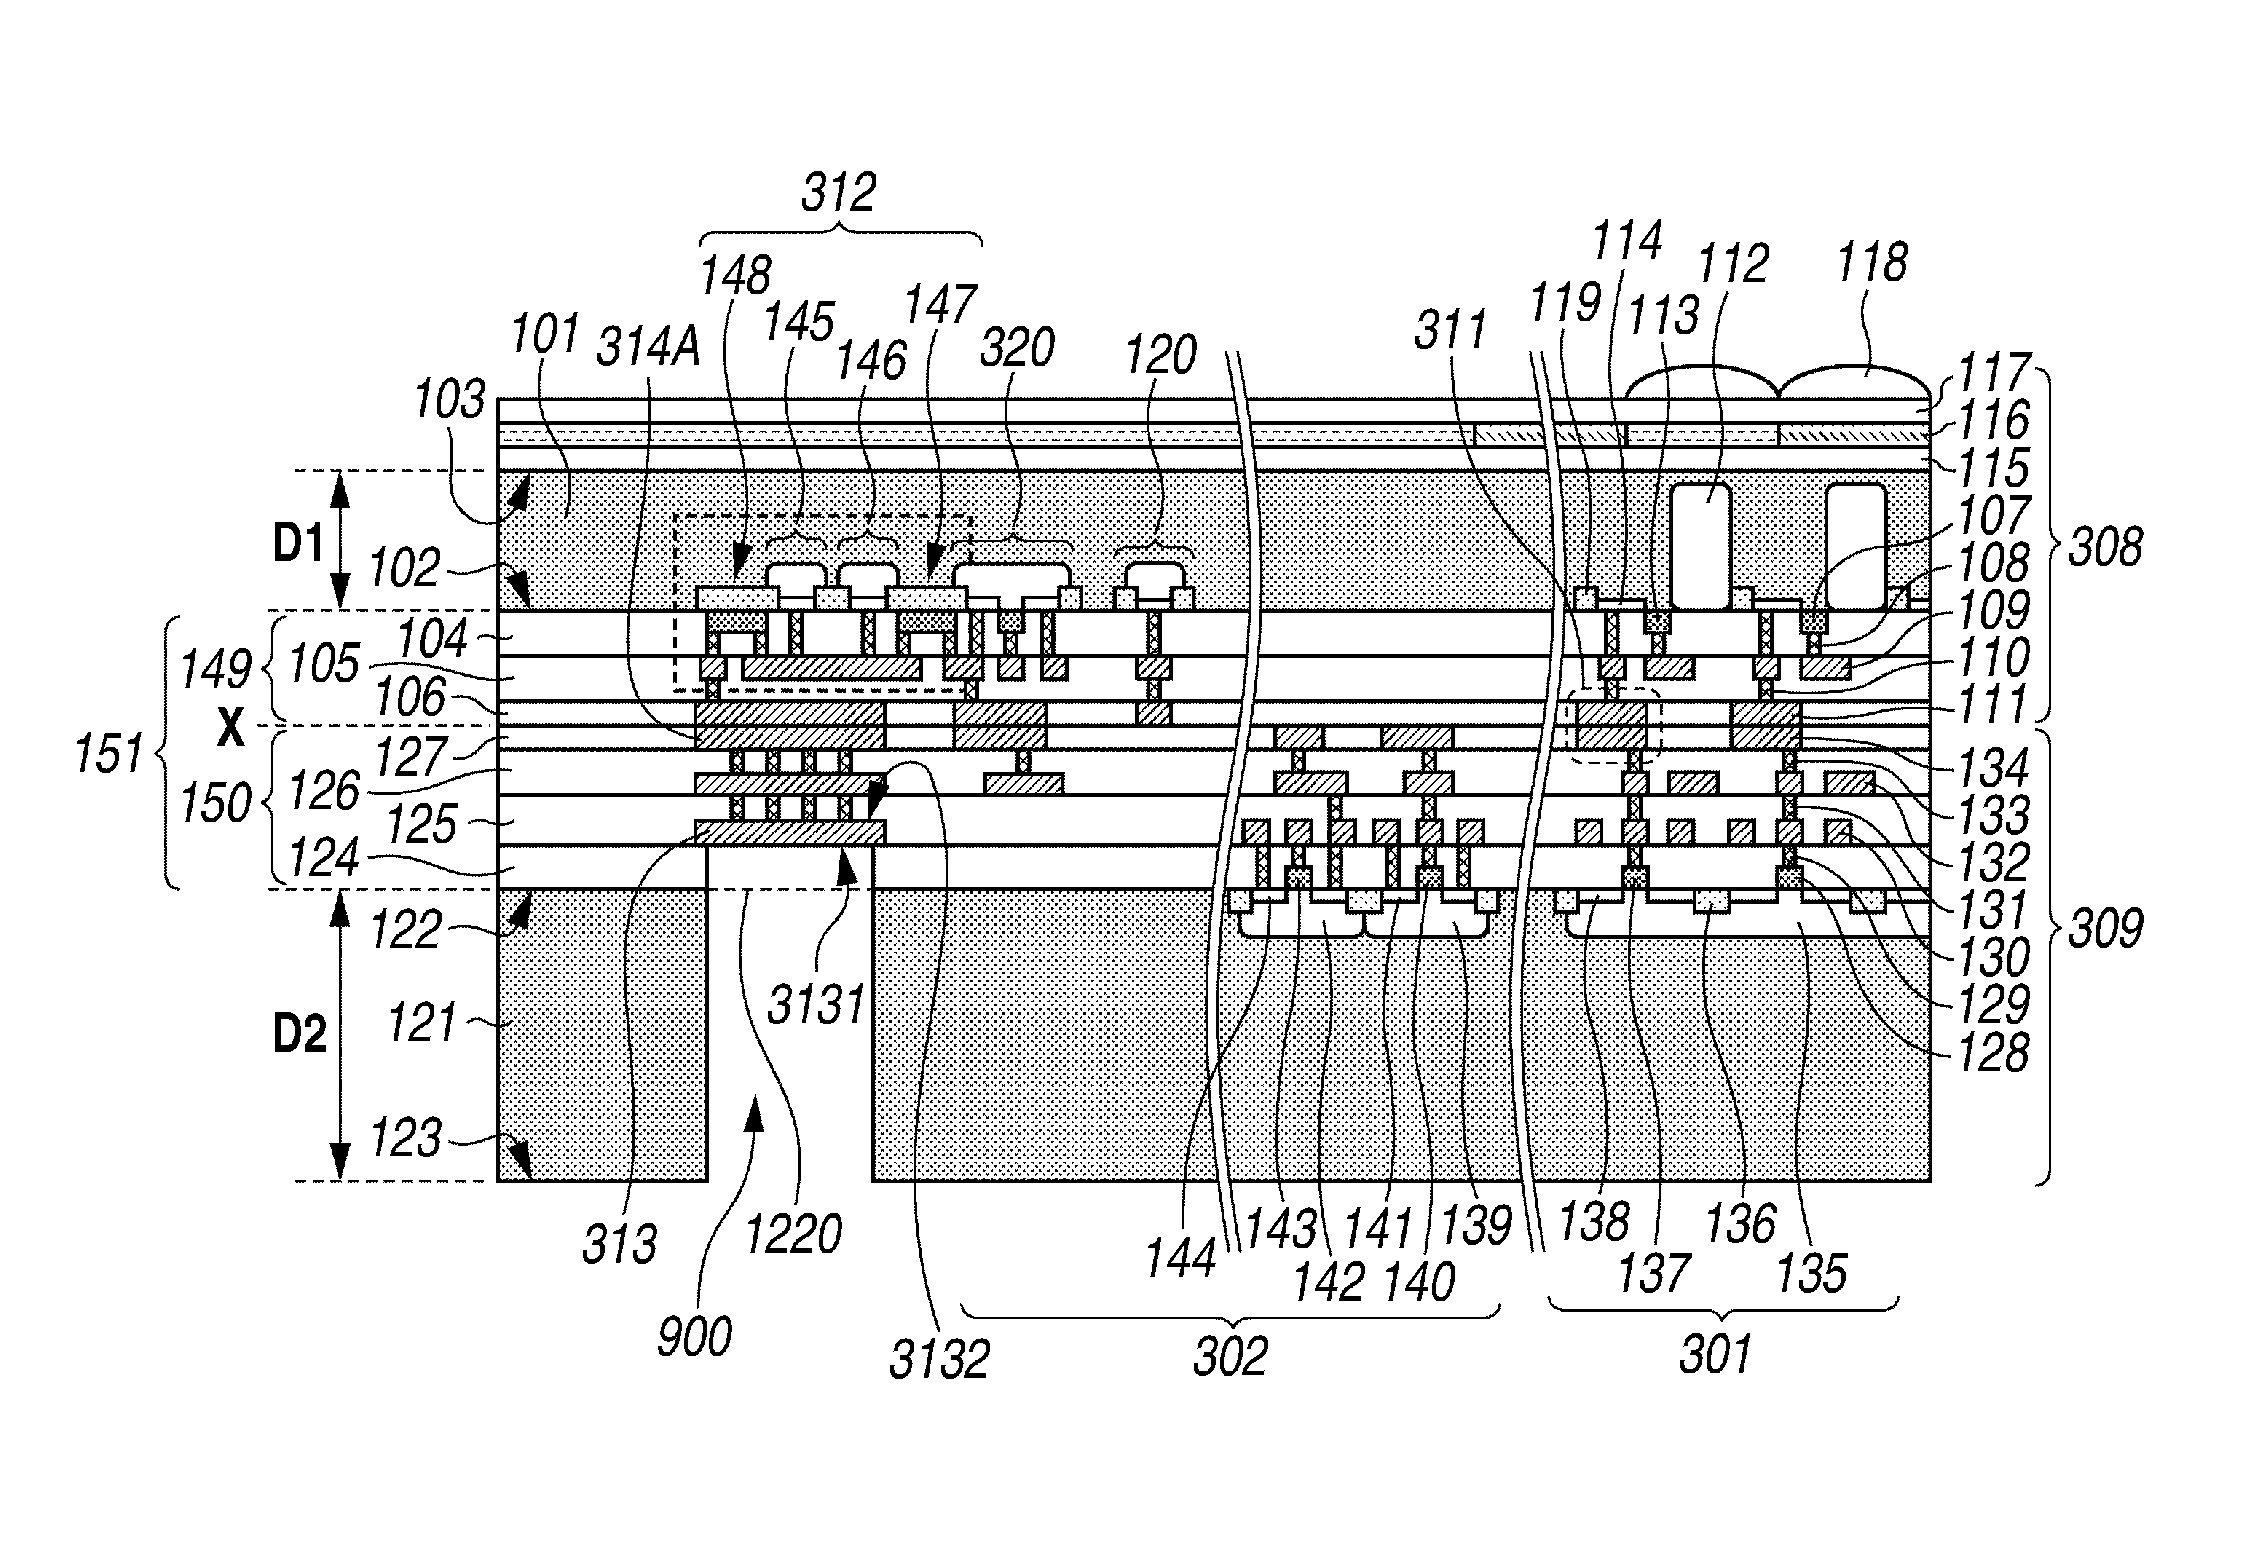 Solid-state imaging apparatus and manufacturing method of solid-state imaging apparatus